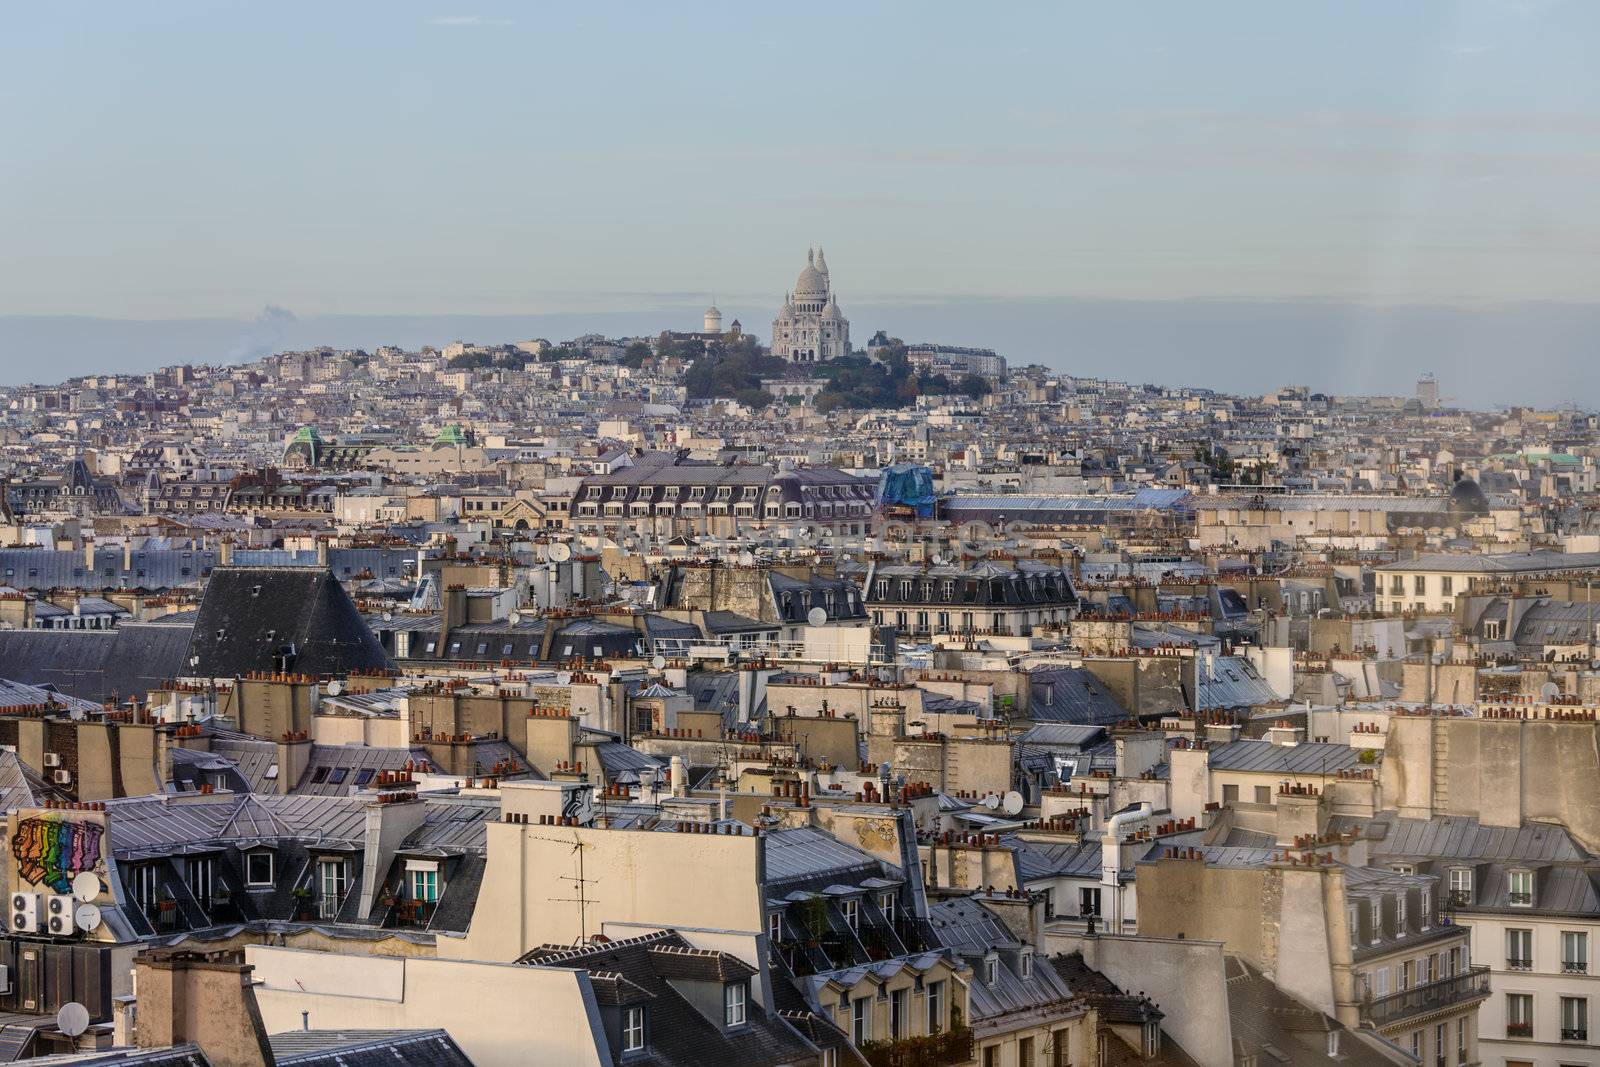 The Sacre-Coeur basilica in Montmartre, Paris seen from Centre Georges-Pompidou